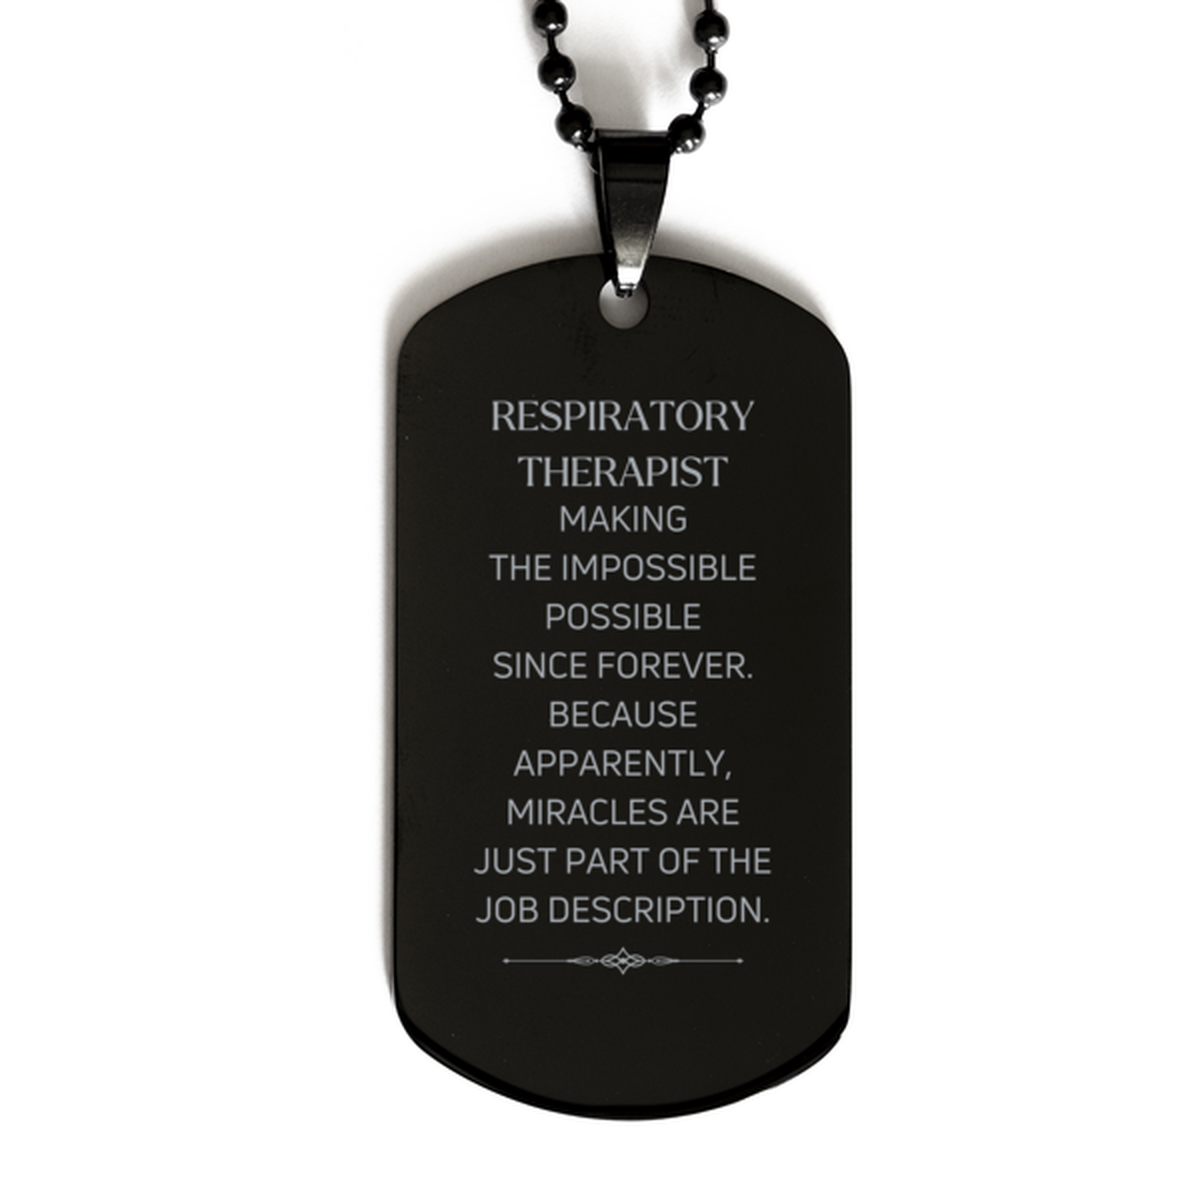 Funny Respiratory Therapist Gifts, Miracles are just part of the job description, Inspirational Birthday Black Dog Tag For Respiratory Therapist, Men, Women, Coworkers, Friends, Boss